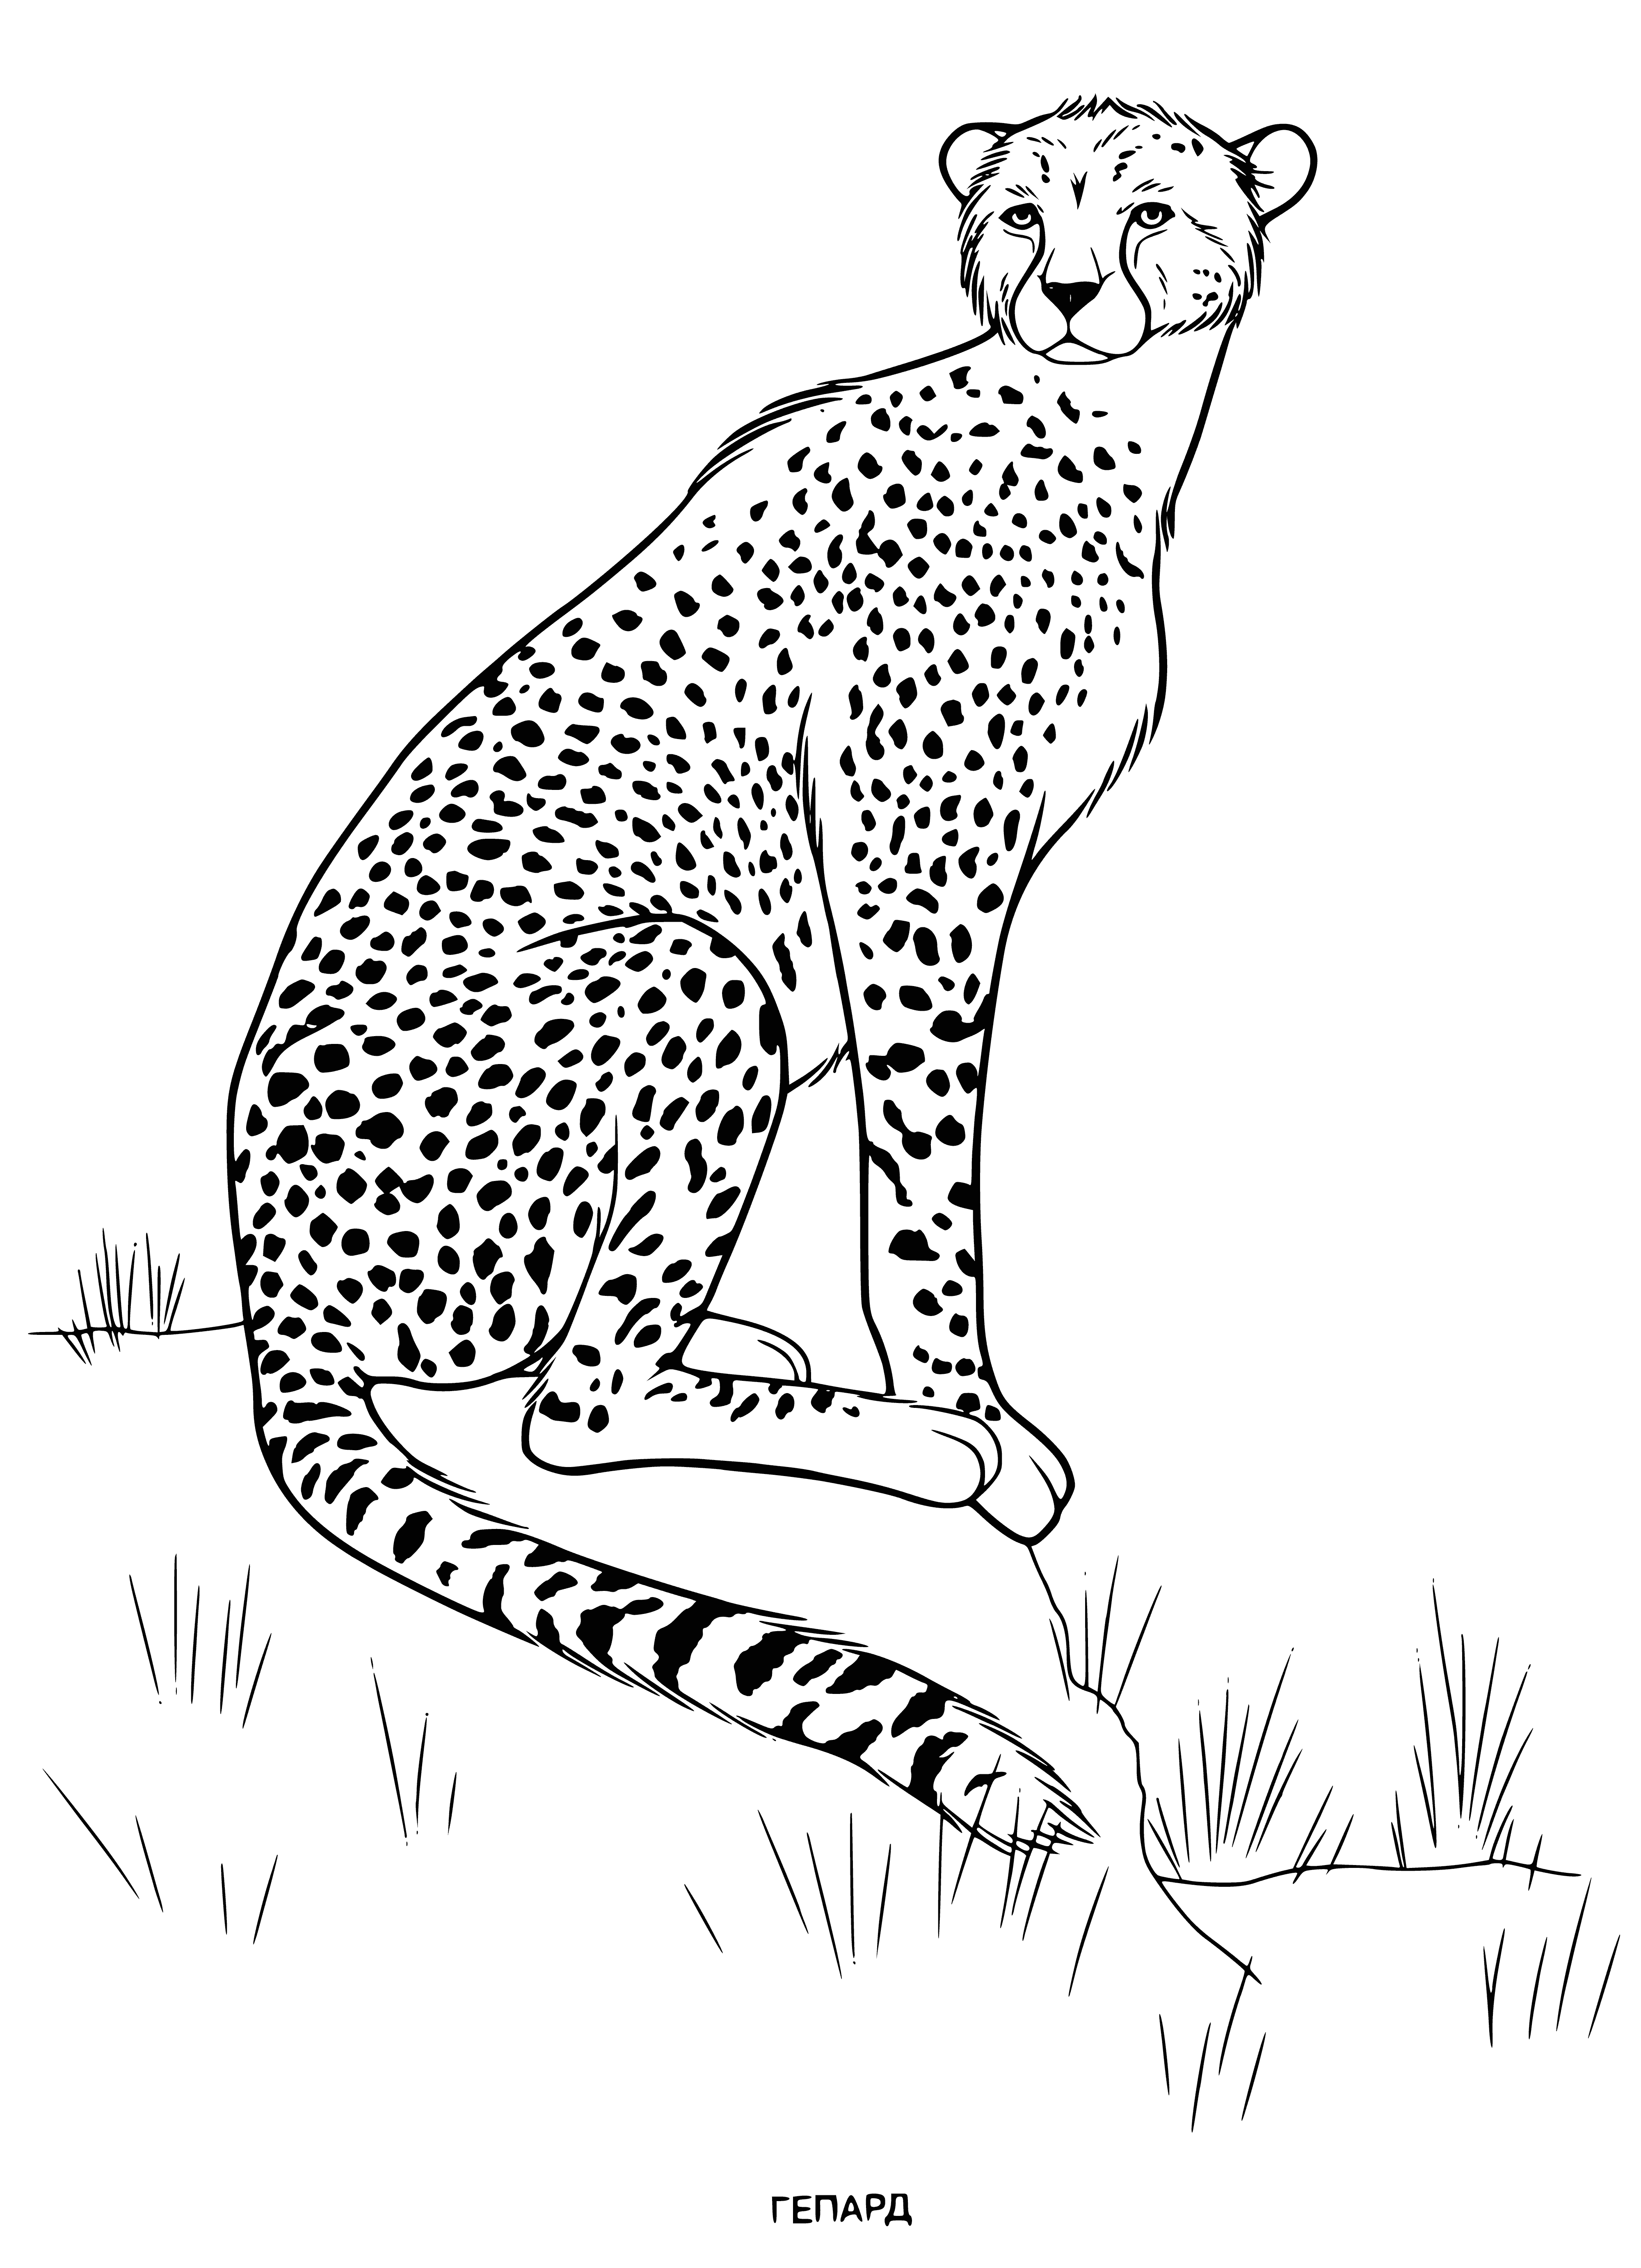 coloring page: Large, musc. cat w/long tail, spots & almond-shaped eyes. Hind legs longer than front, giving it alert appearance & short, black muzzle.